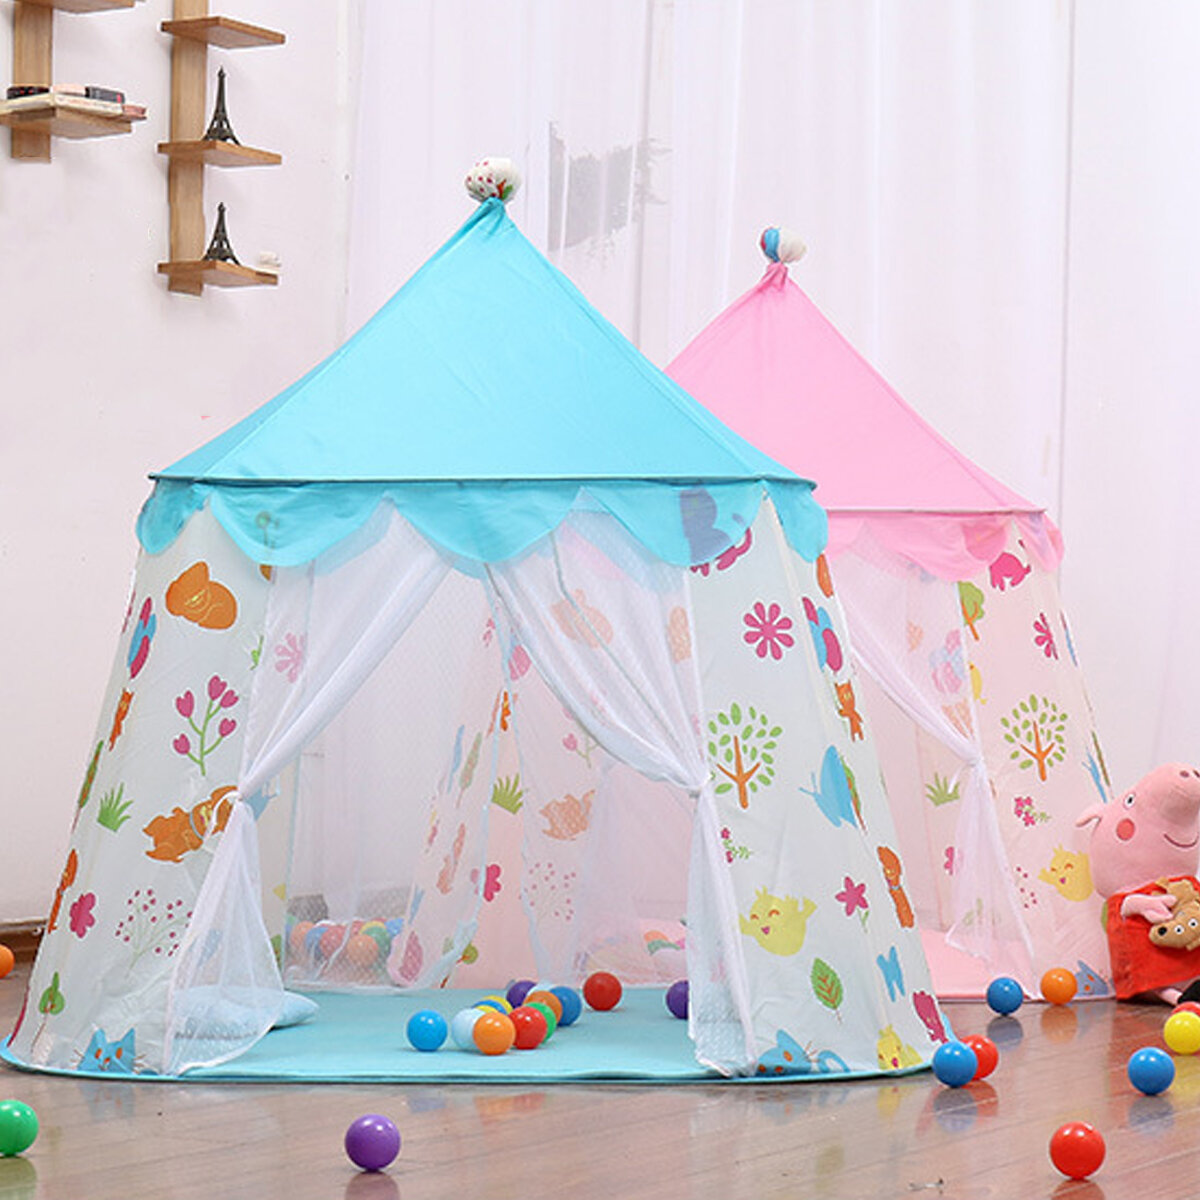 

Princess Castle Large Play Tent Kids Play House Portable Kids Tents for Girl Outdoor Indoor Tent